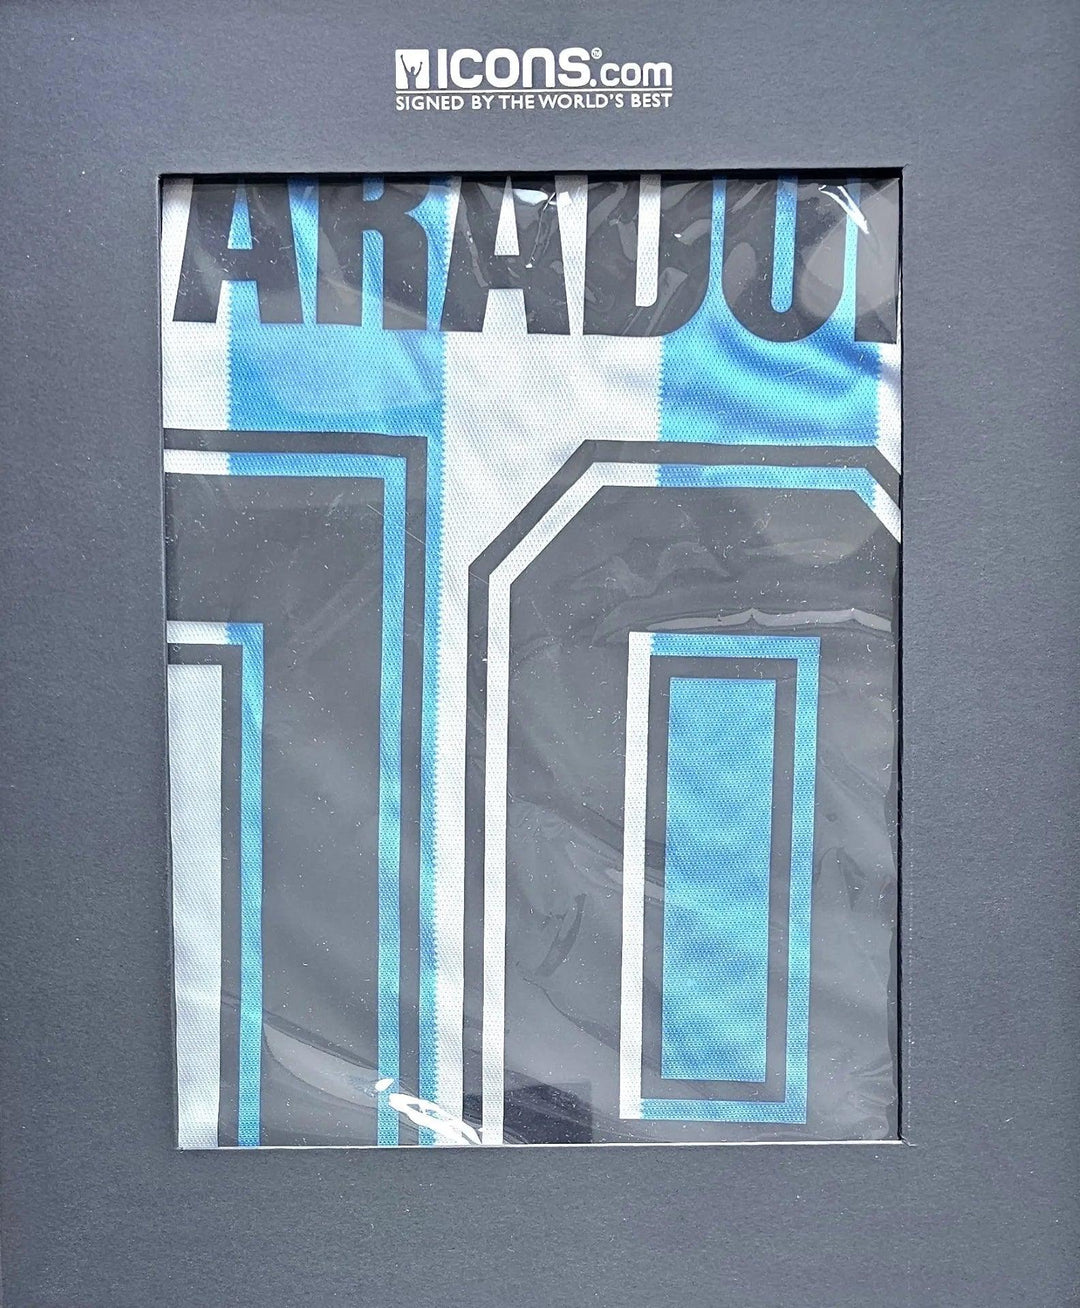 Diego Maradona 10 Argentina 1986 World Cup - Signed Soccer Shirt | Exclusive ICONS COA